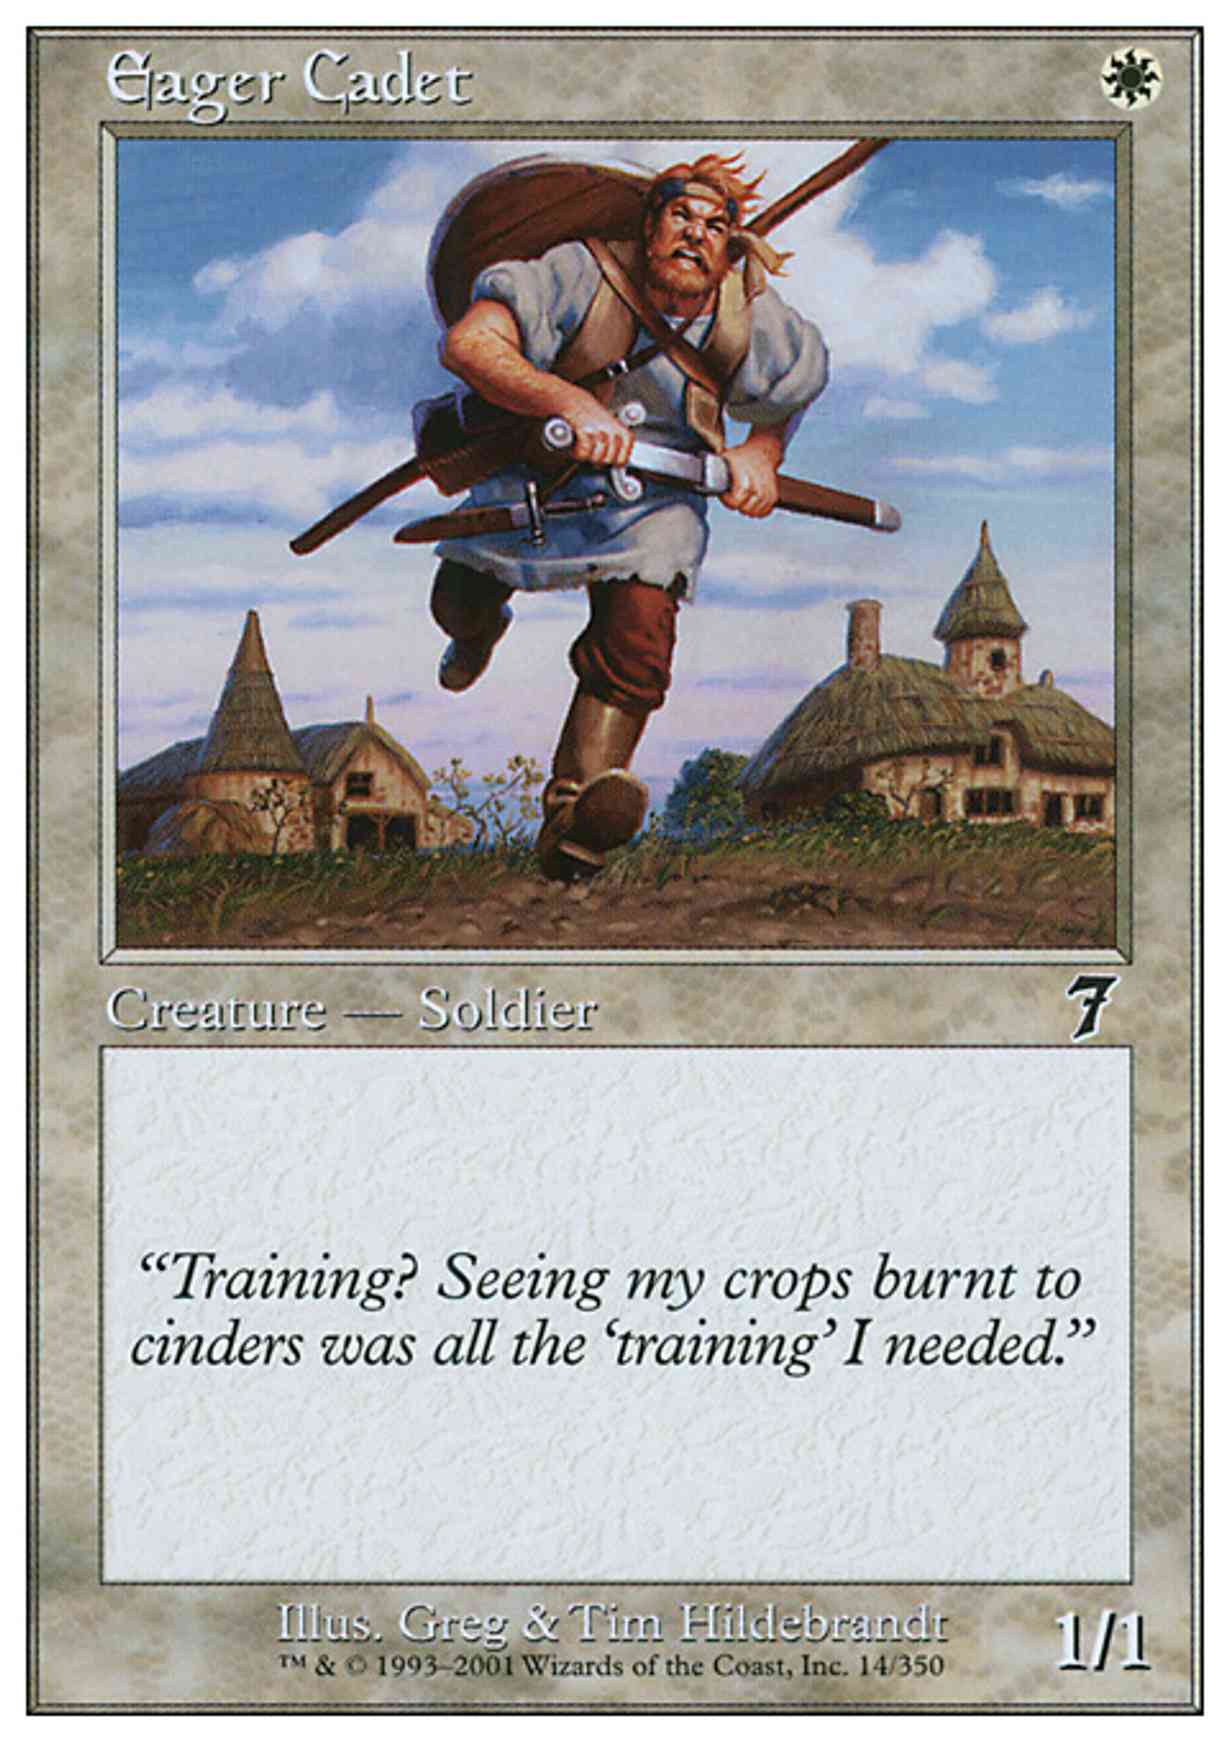 Eager Cadet magic card front